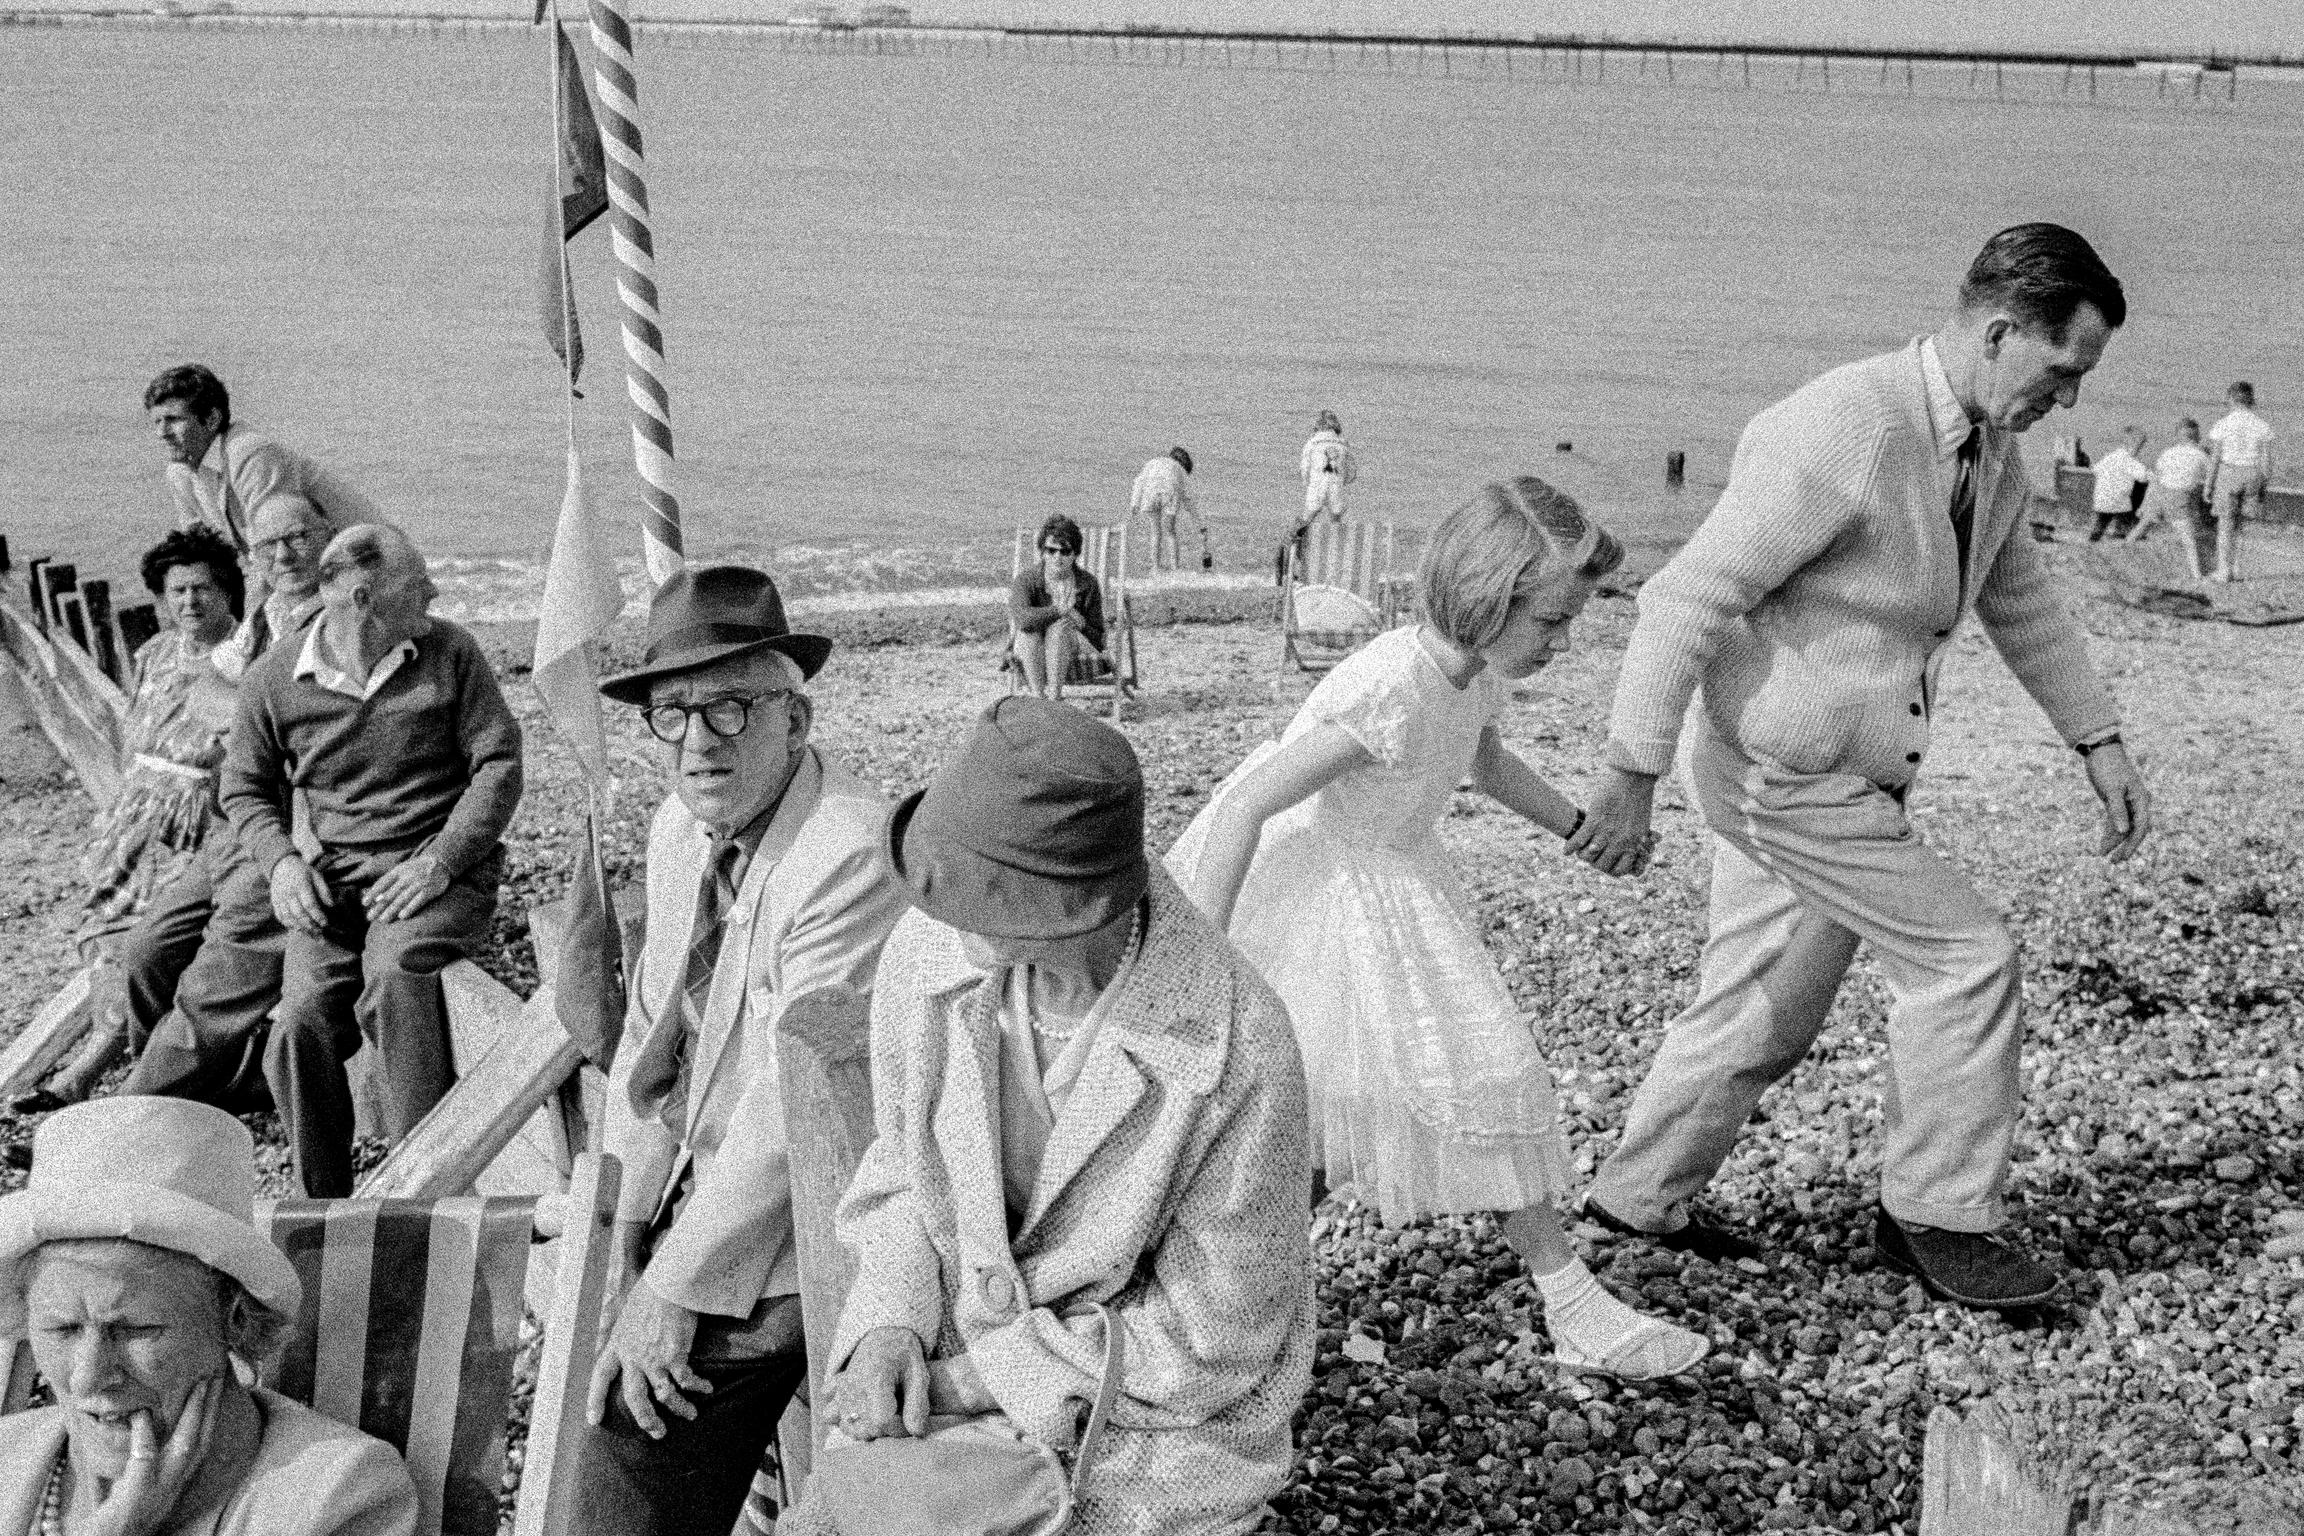 Families on the beach of the working class holiday resort. Herne Bay, UK